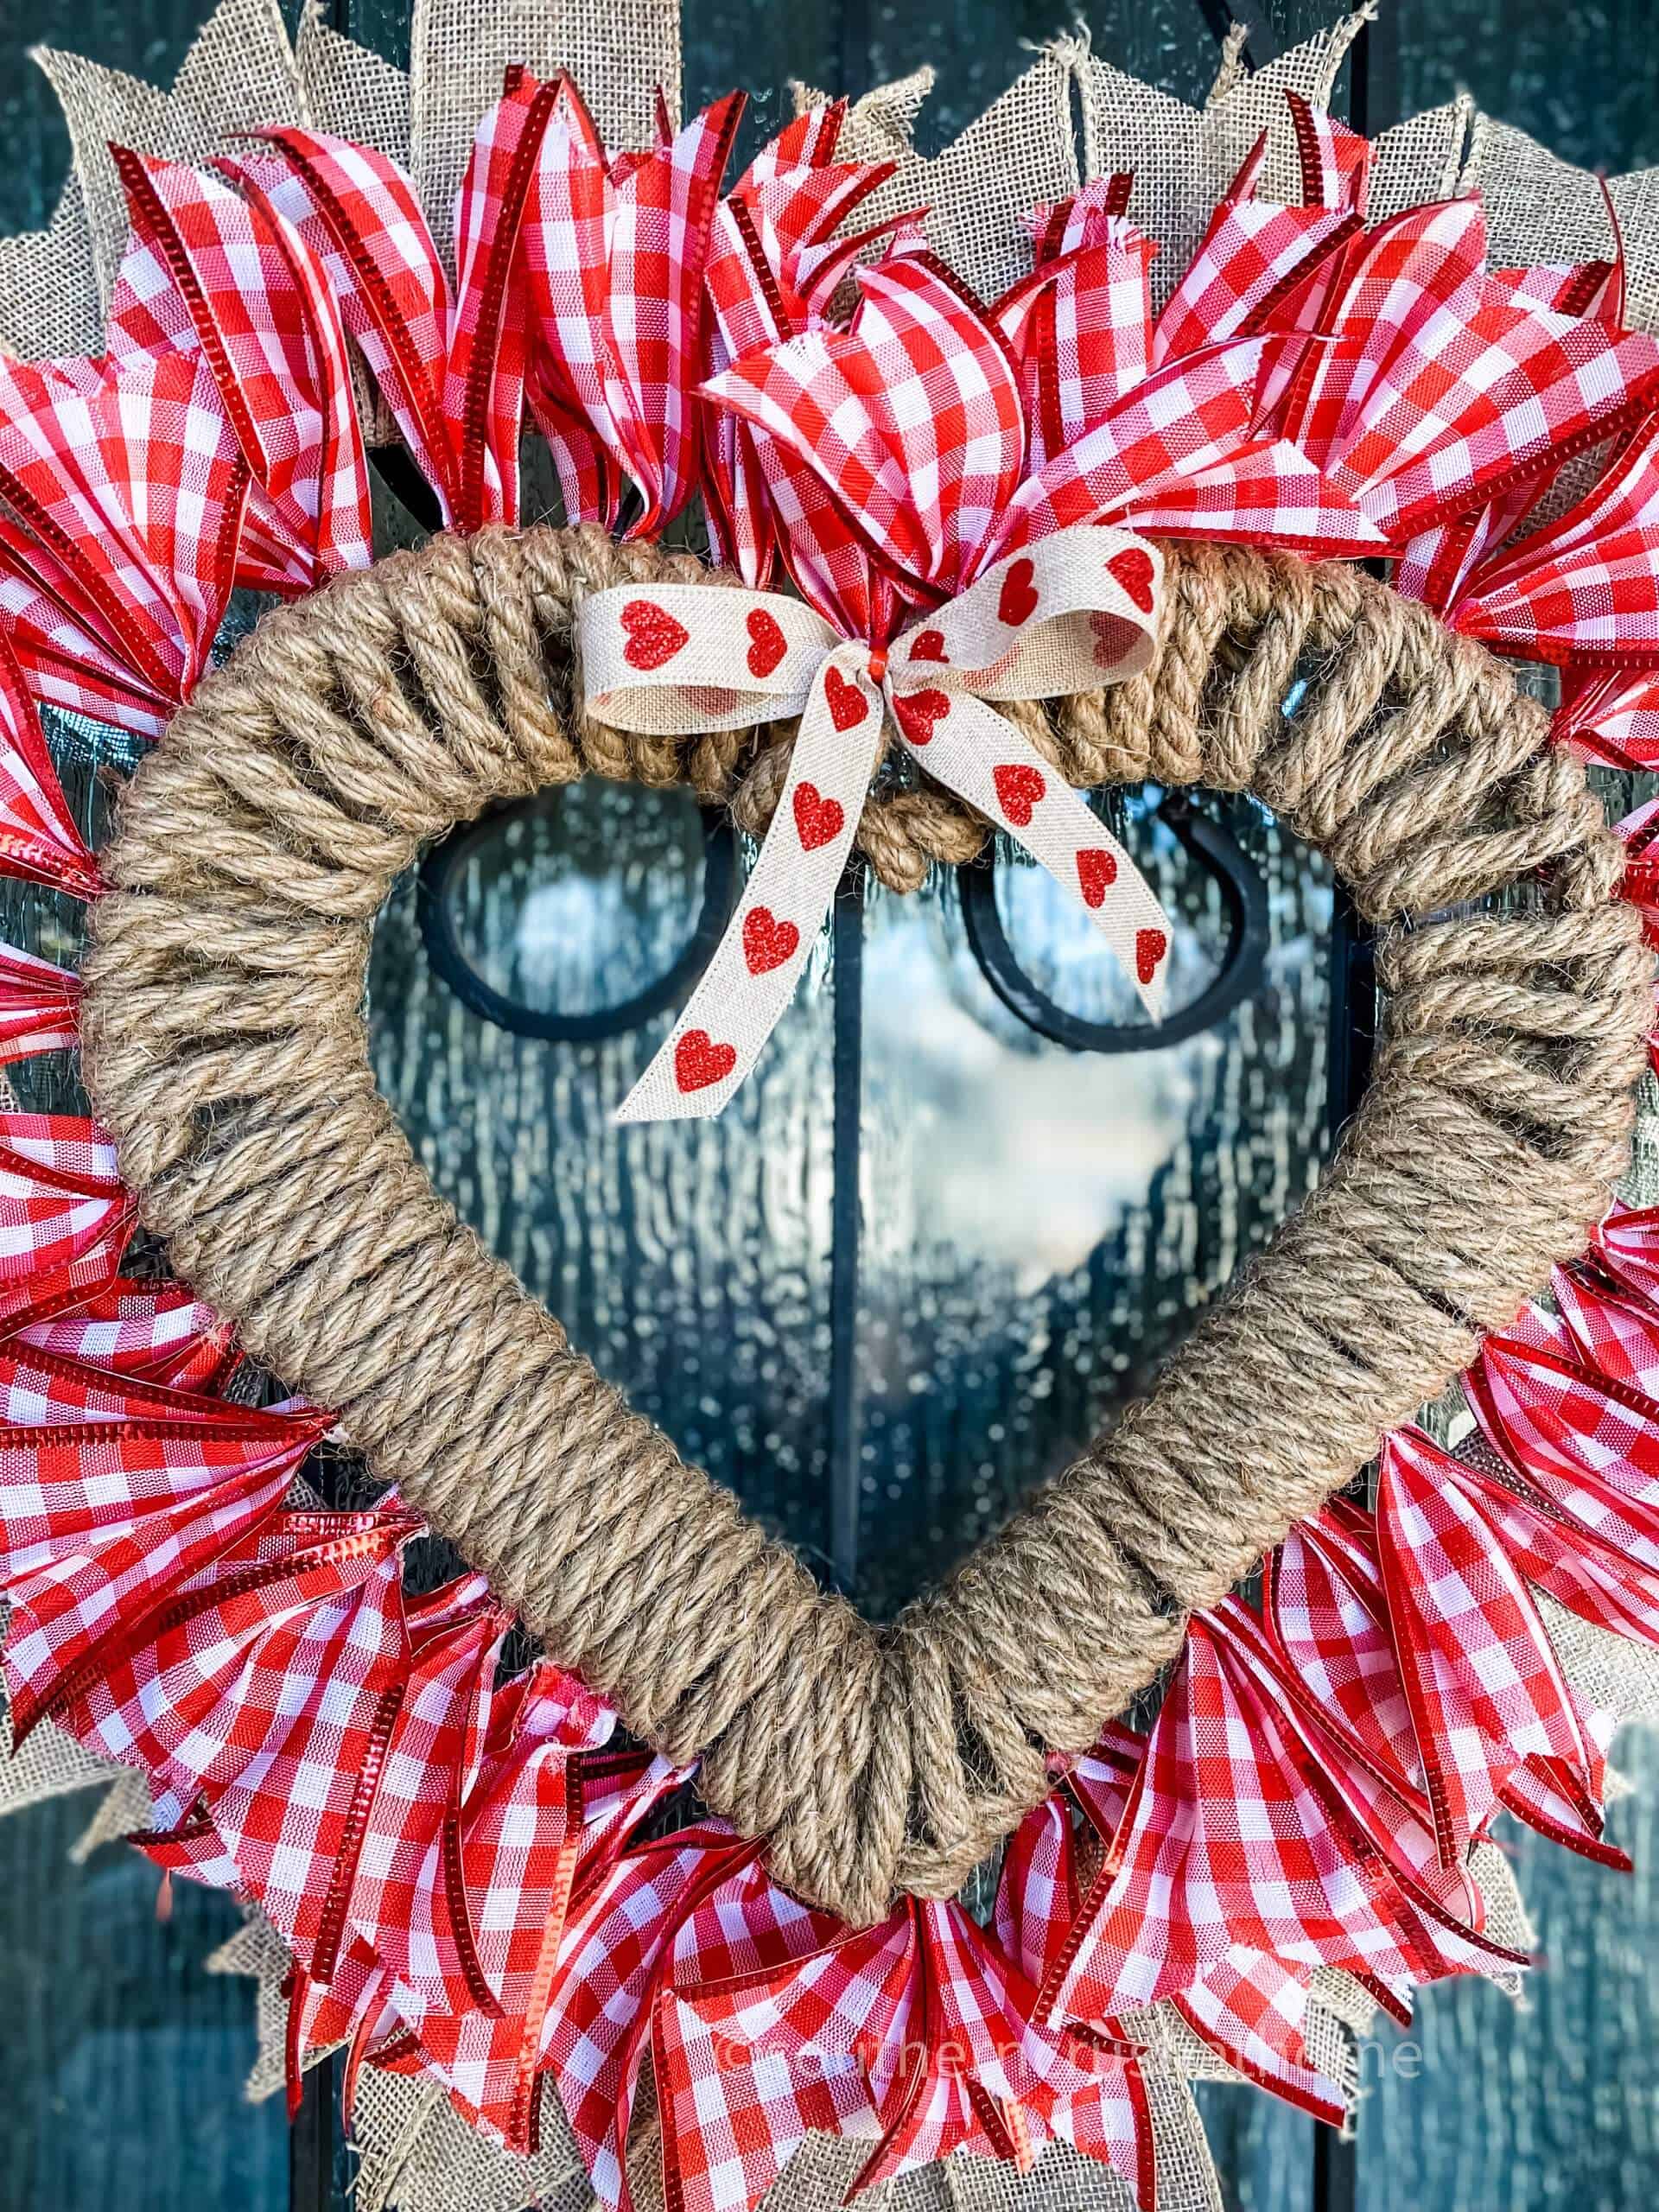 Easy DIY Valentine Heart Wreath (Made With Ribbon)